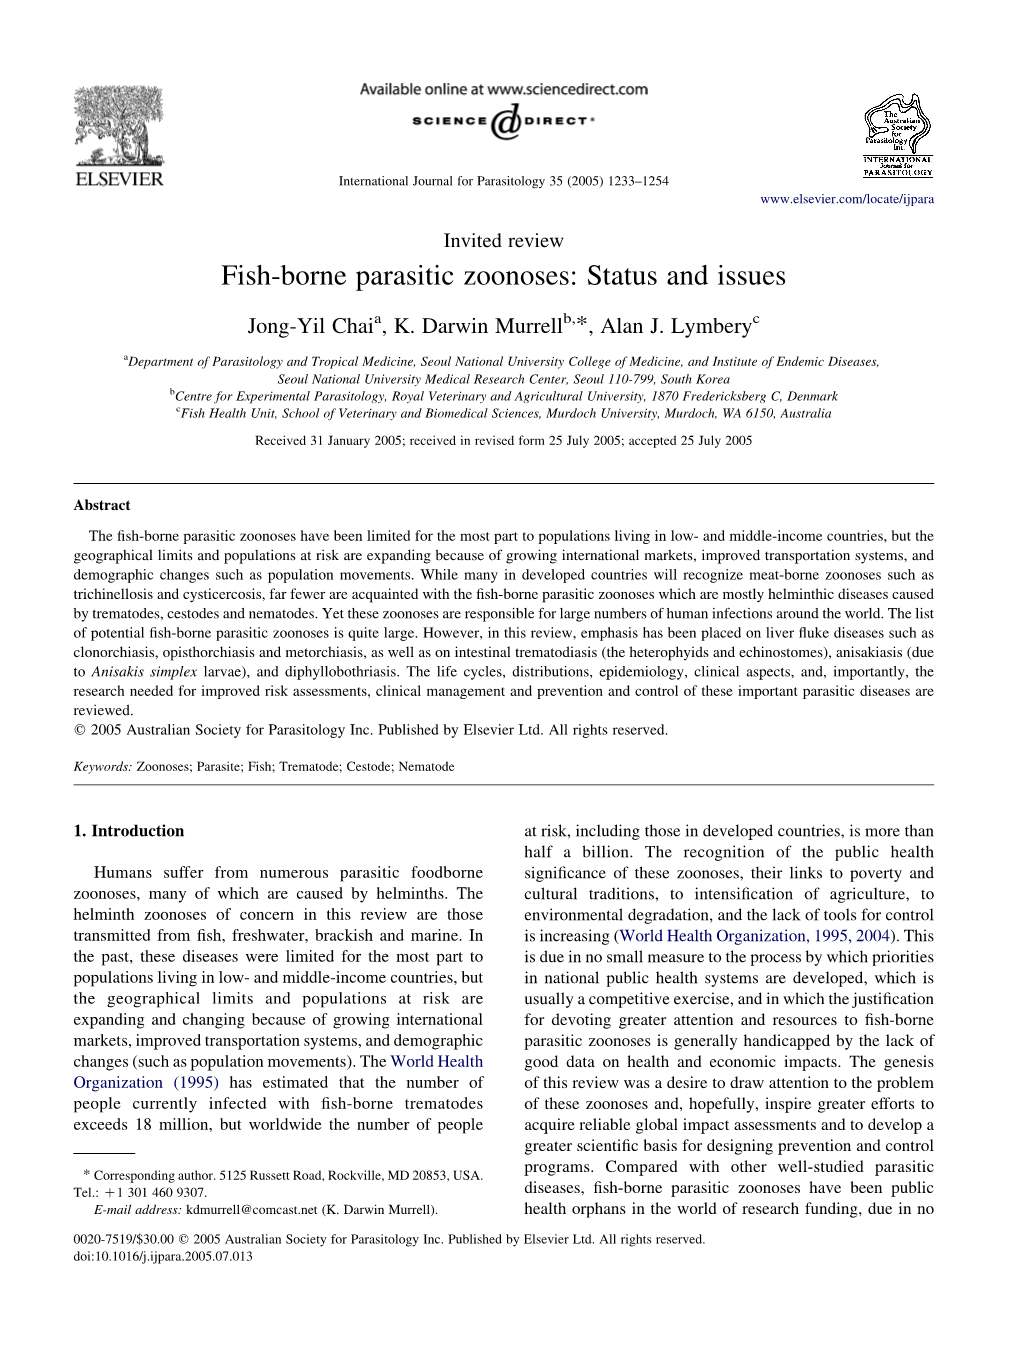 Fish-Borne Parasitic Zoonoses: Status and Issues